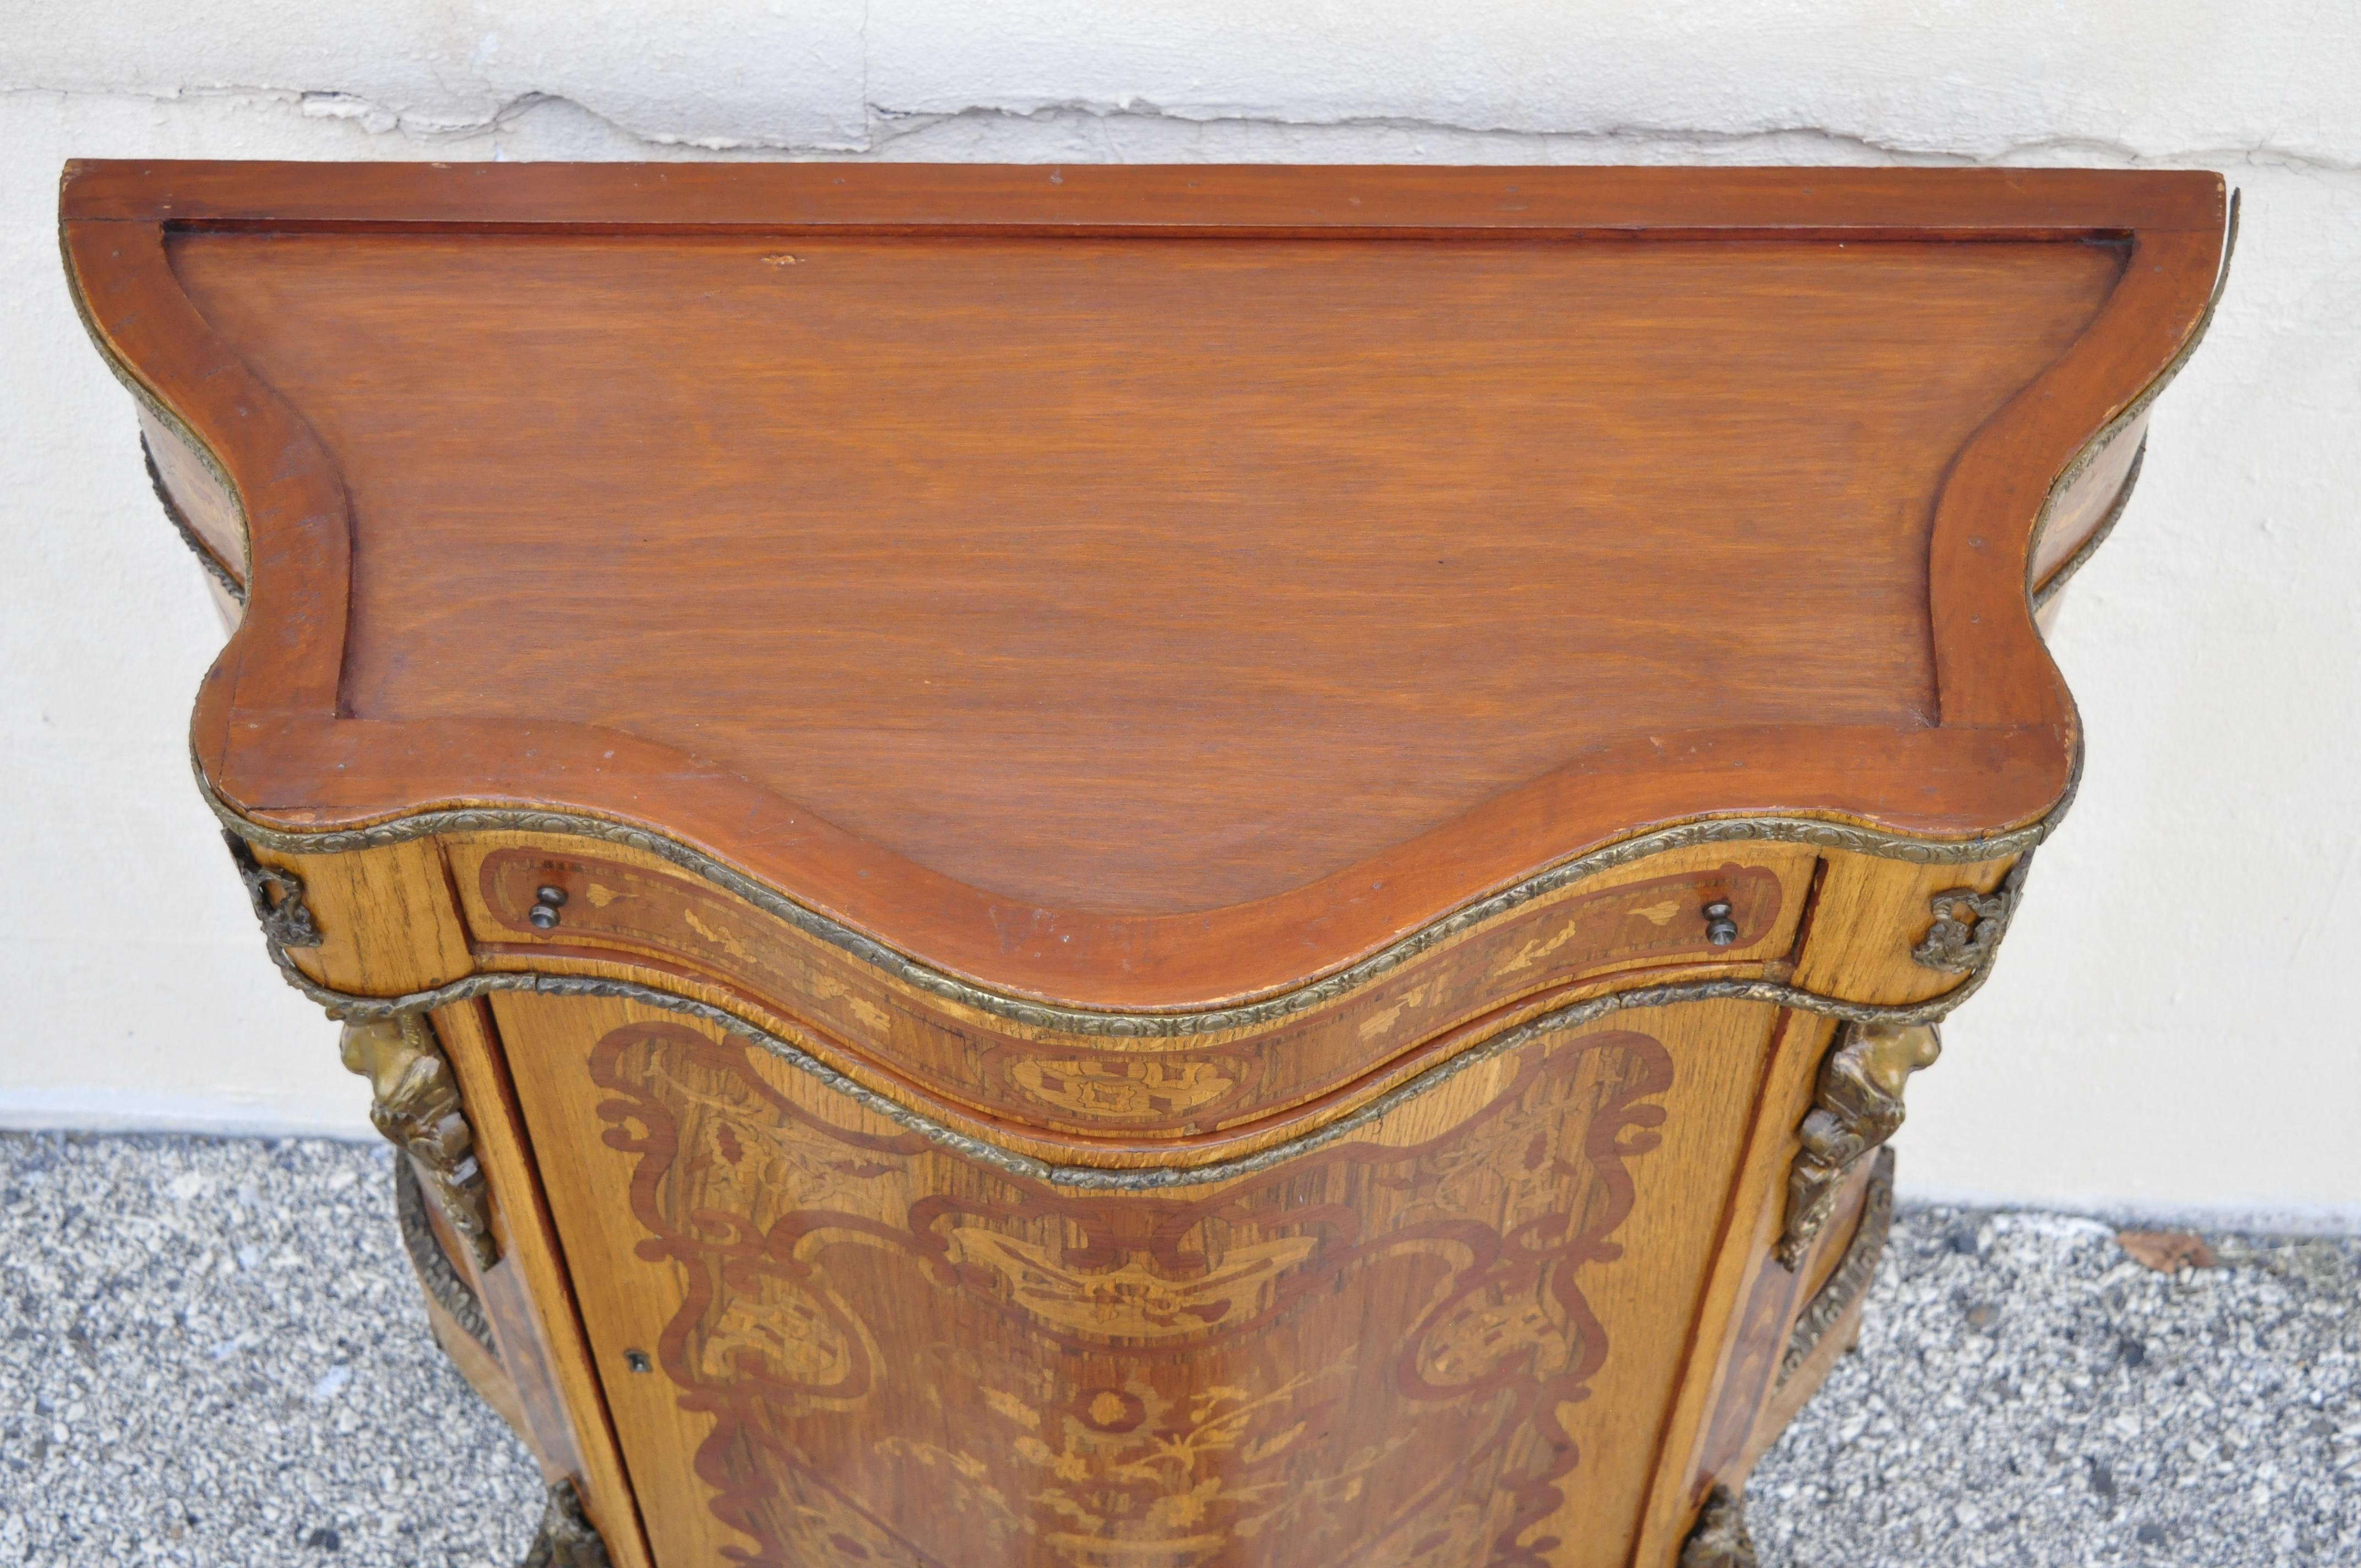 French Louis XV Bronze Ormolu Satinwood Inlay Commode Sideboard Bombe Cabinet 1